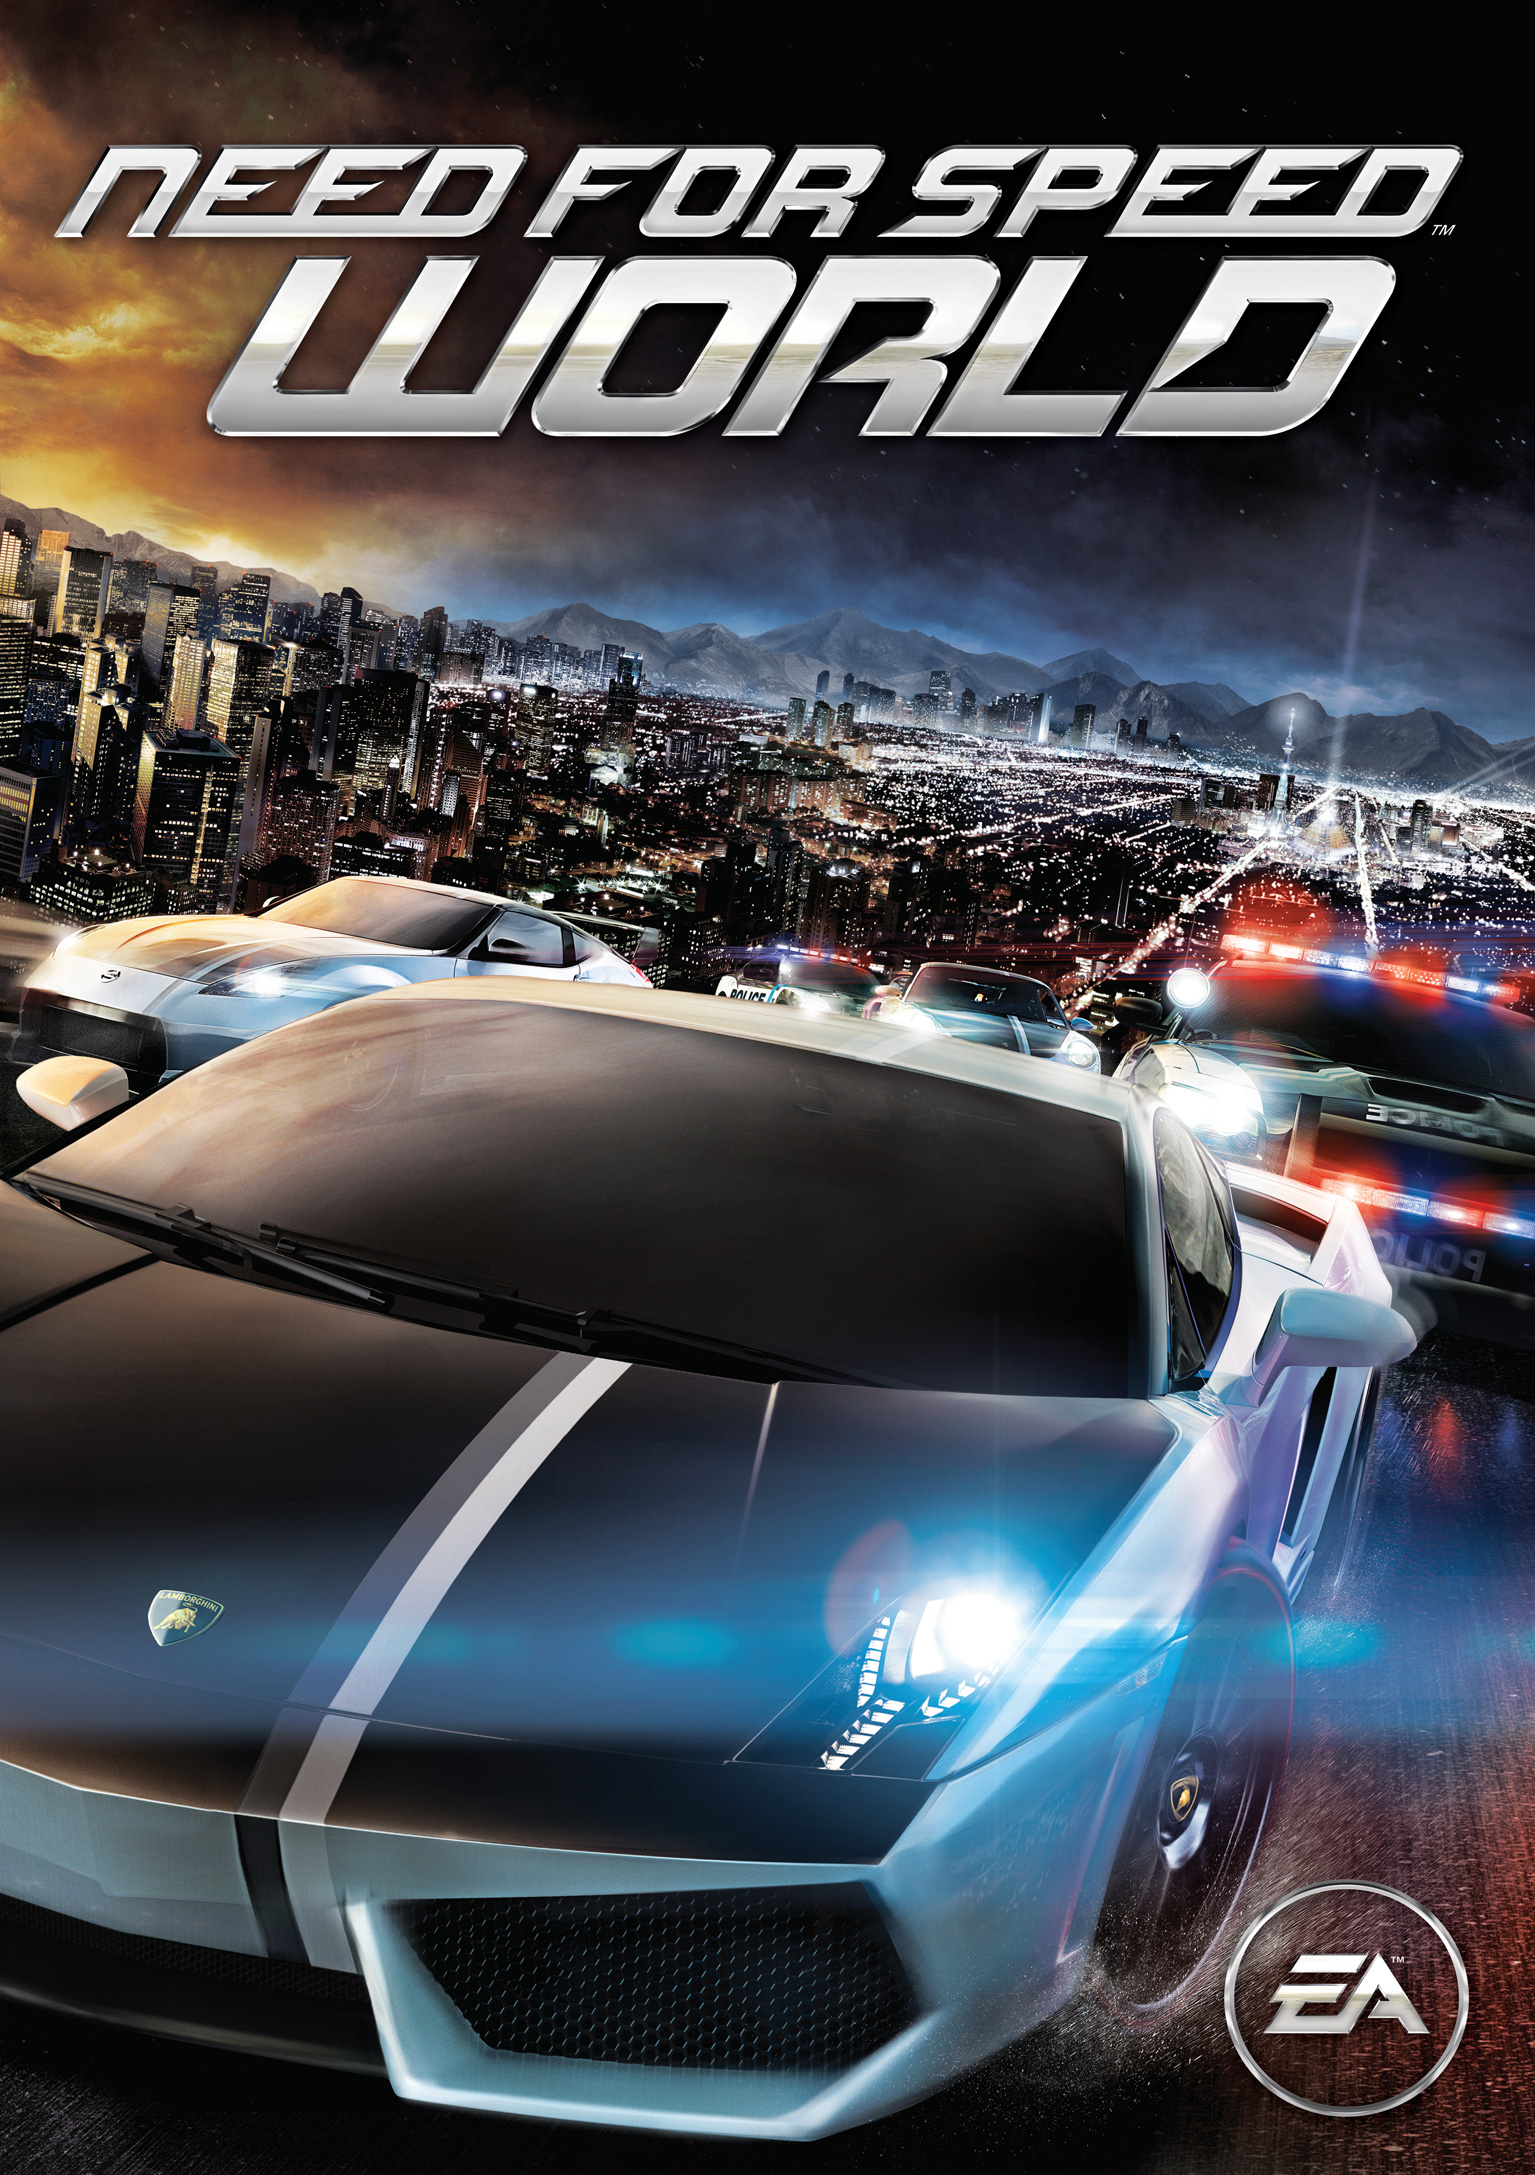 Nfs assemble. Нид фор СПИД игра. NFS обложка. Need for Speed World. Need for Speed диск.